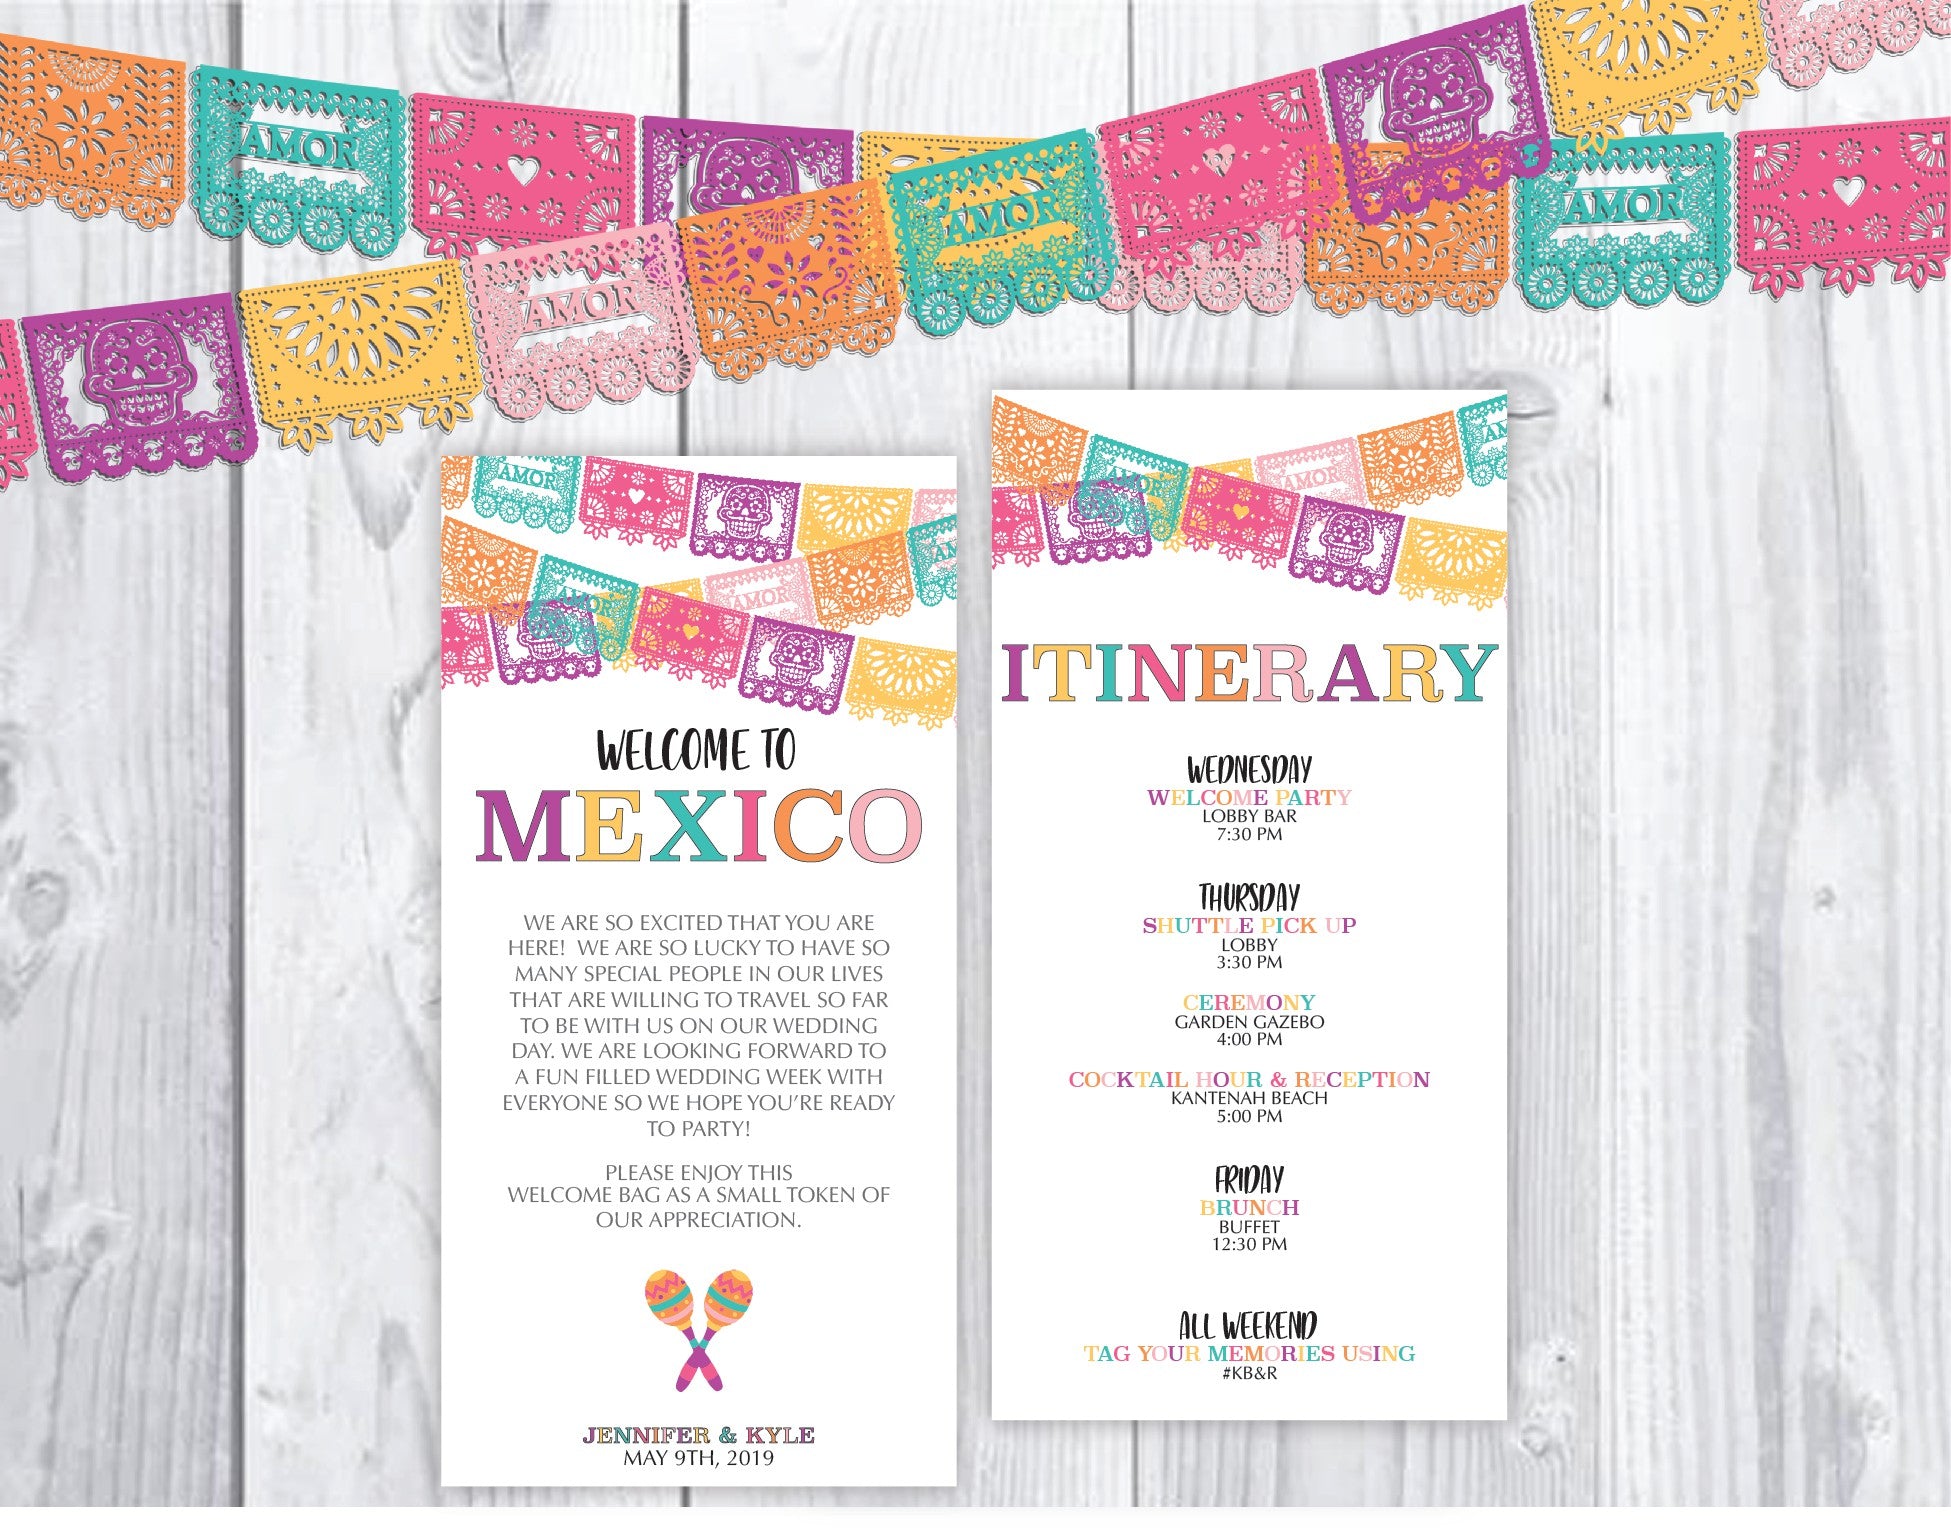 Mexico wedding welcome letter and itinerary cards